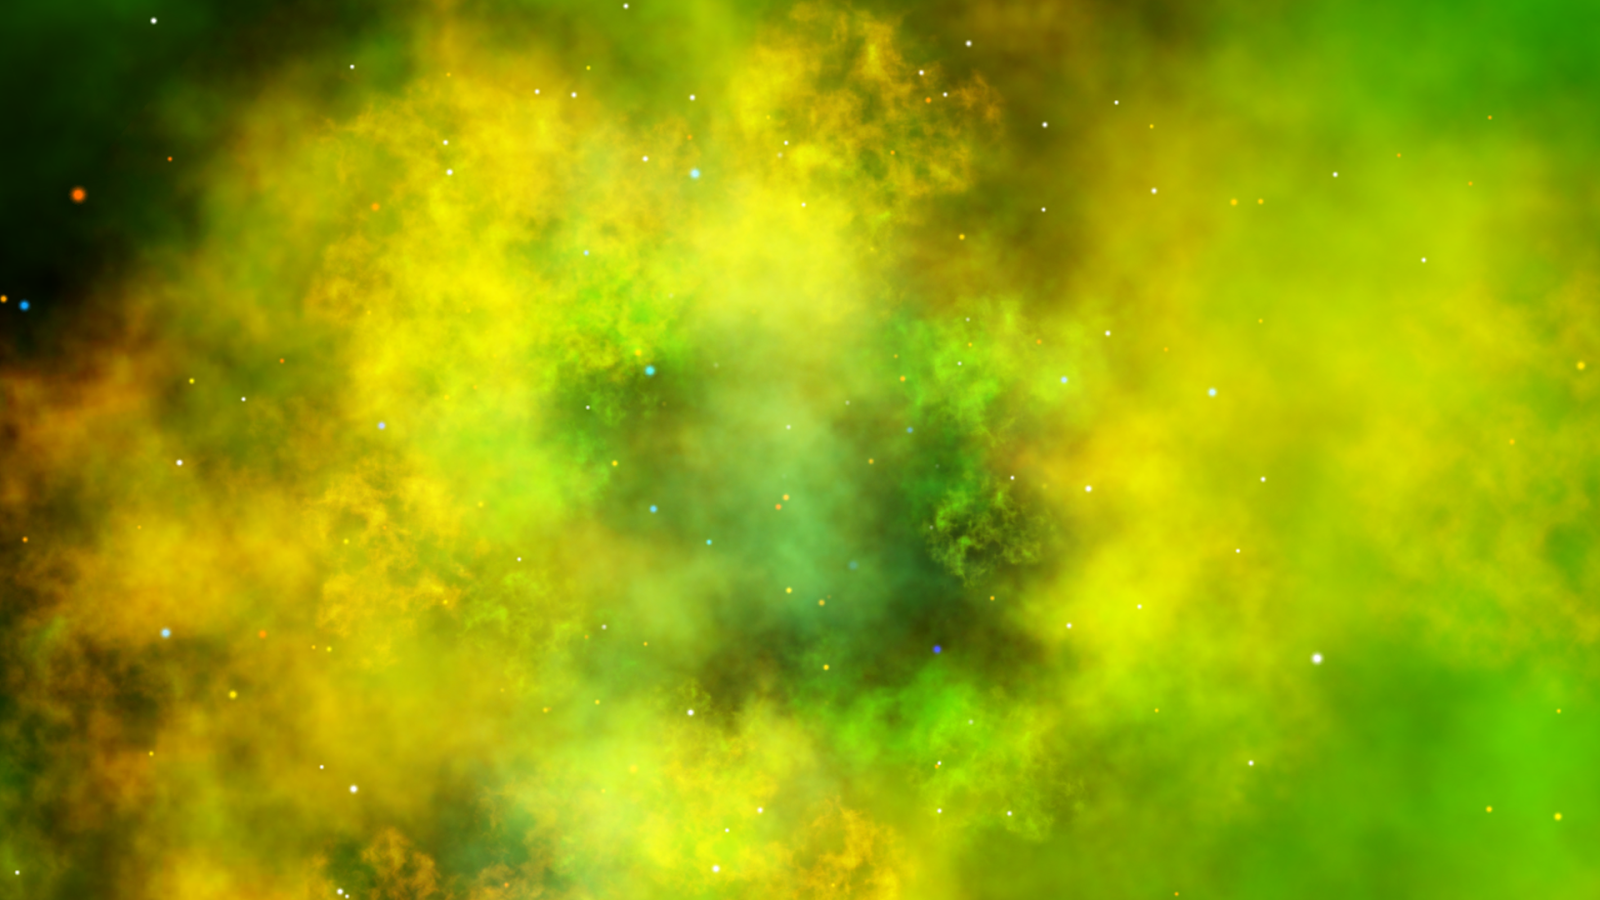 Gold Nebula Live Wallpaper - Android Apps on Google Play